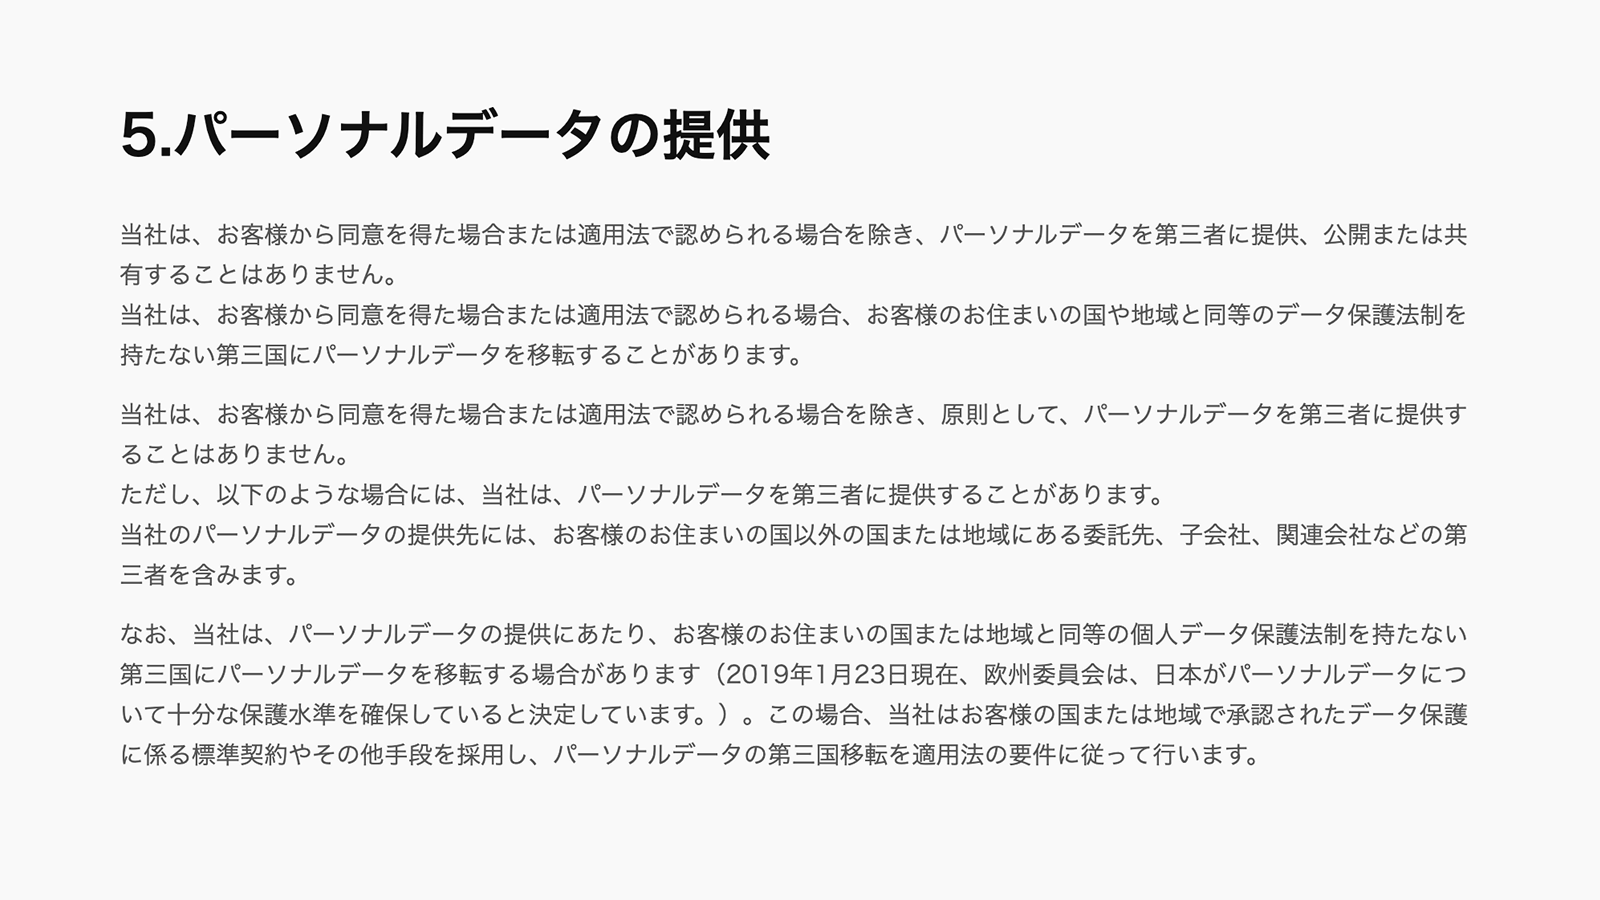 https://line.me/ja/terms/policy/ 2021年3月24日最終アクセス